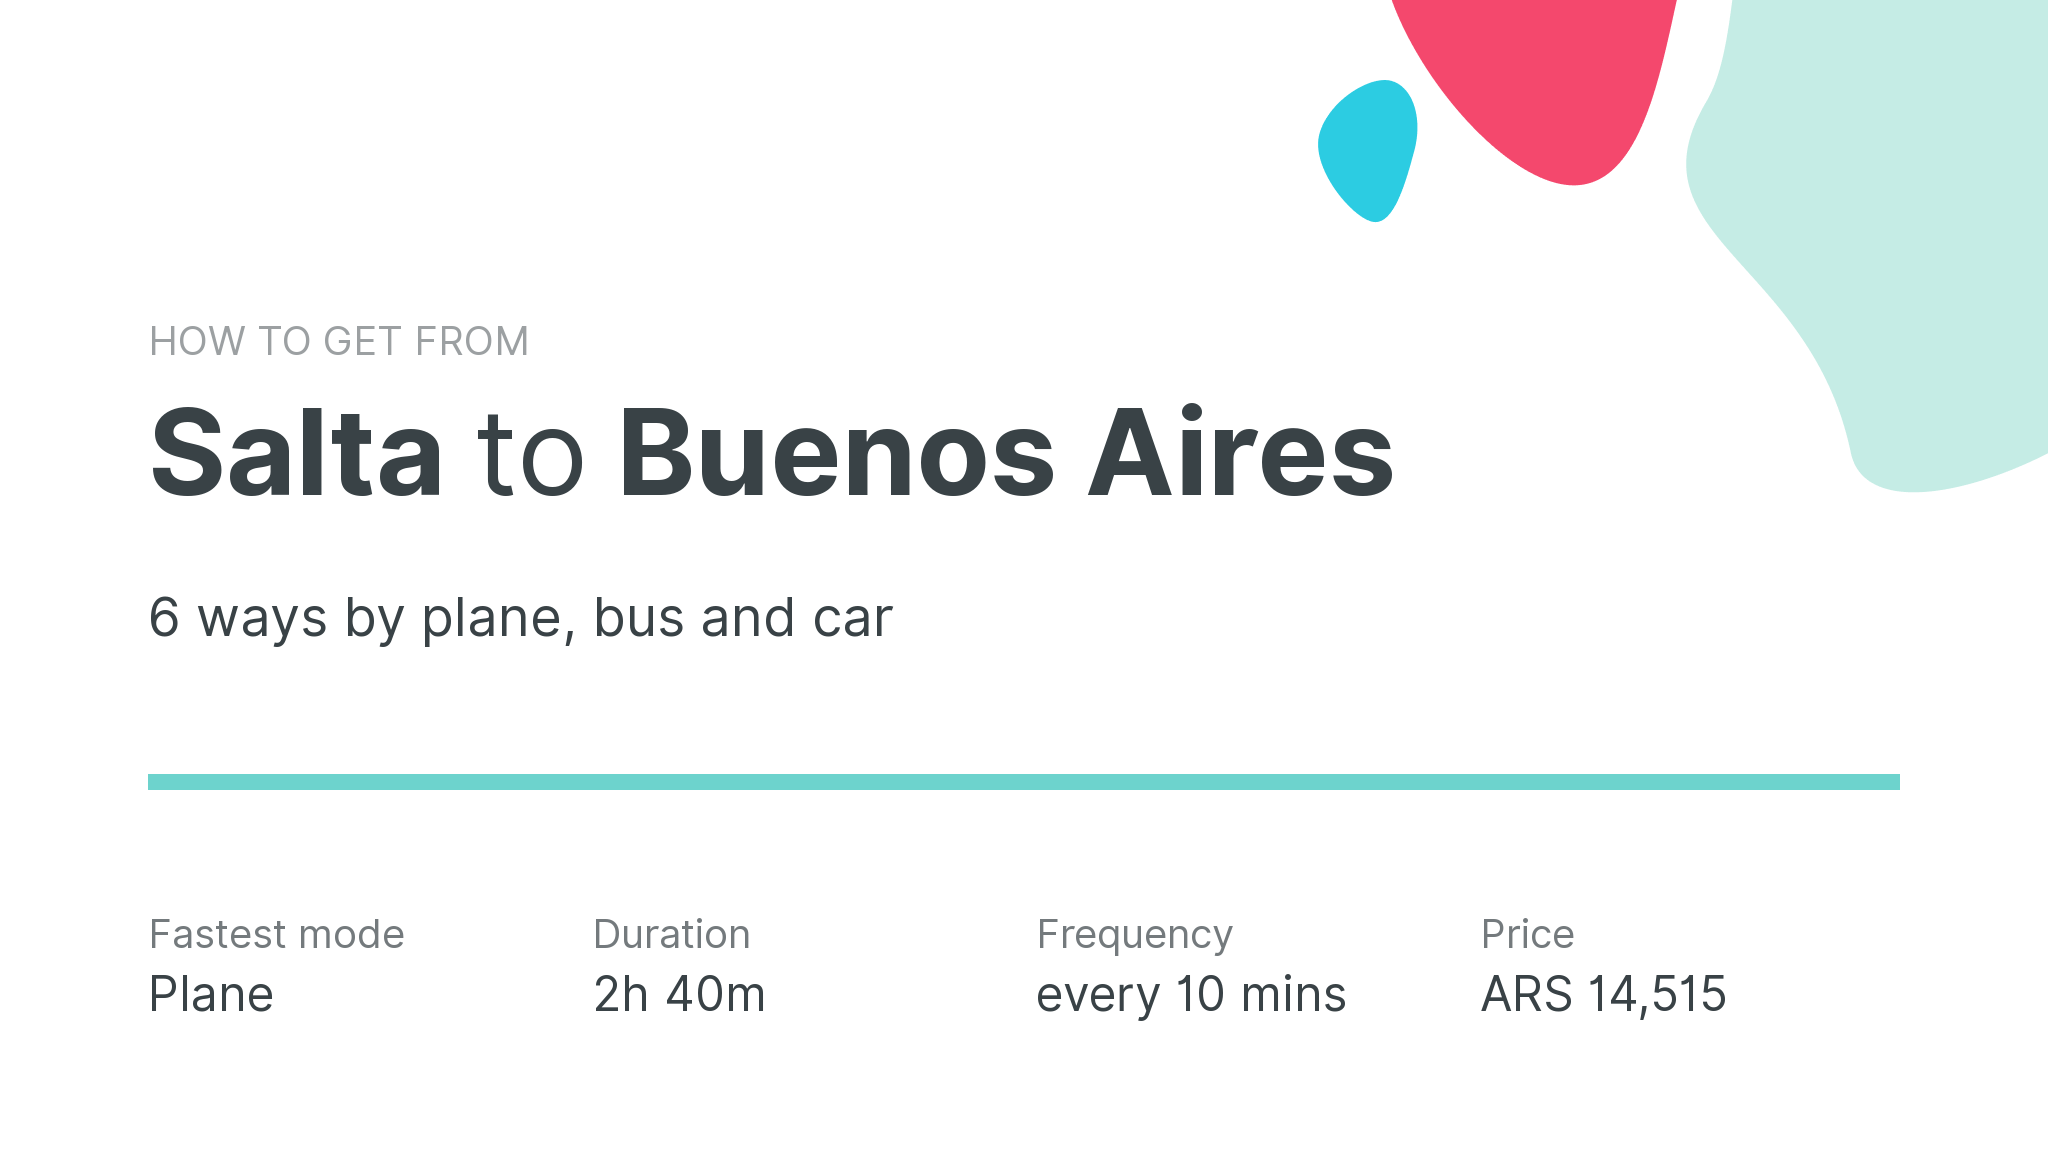 How do I get from Salta to Buenos Aires